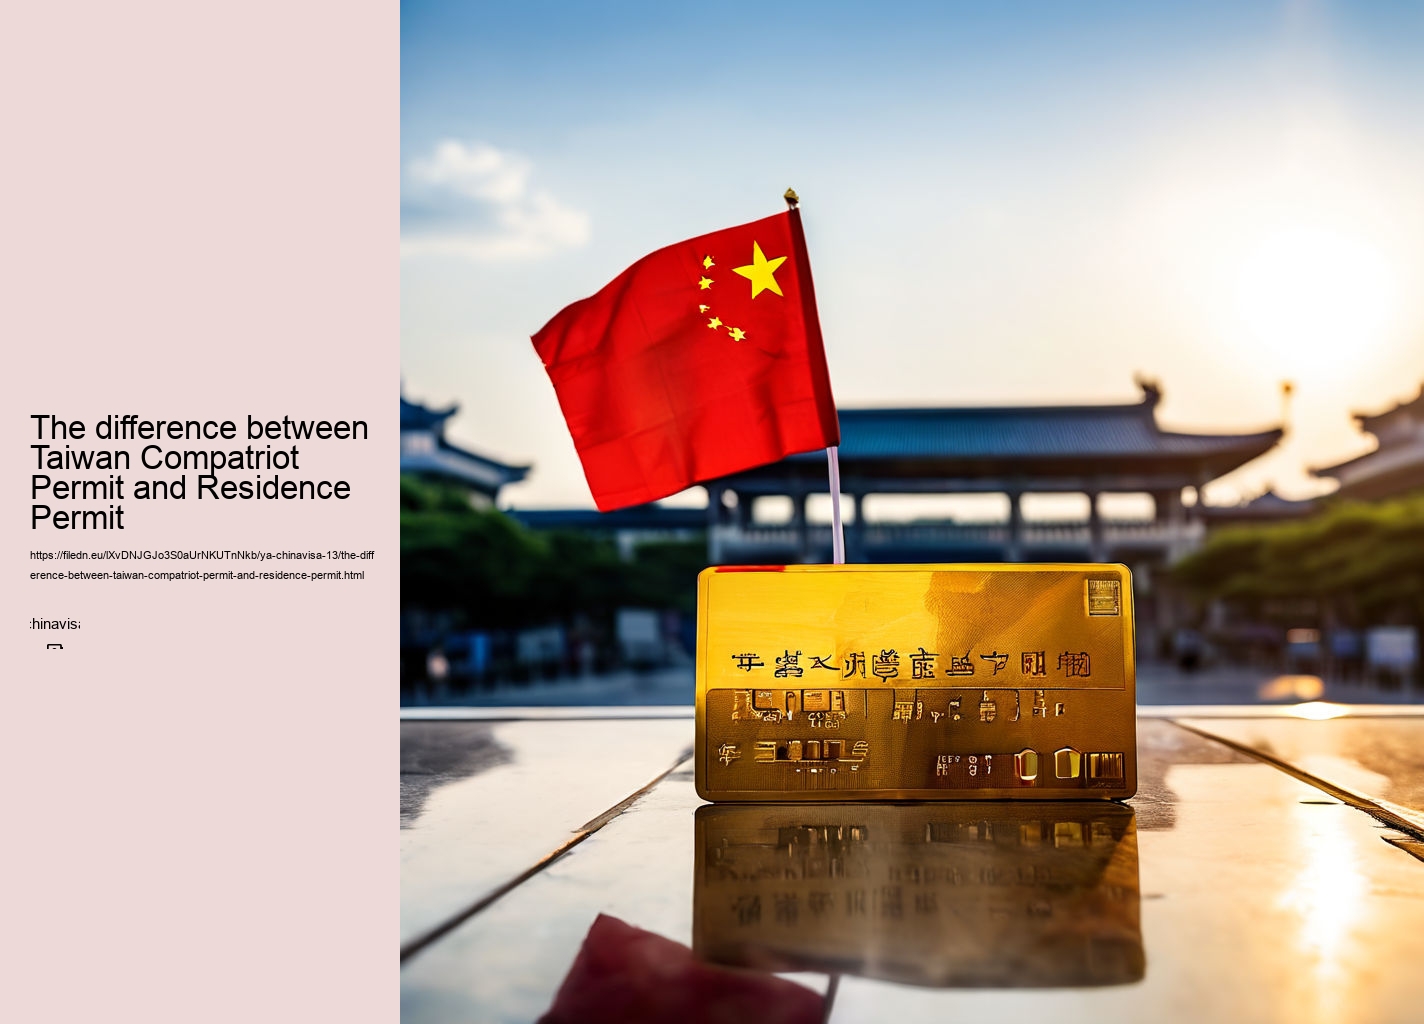 The difference between Taiwan Compatriot Permit and Residence Permit